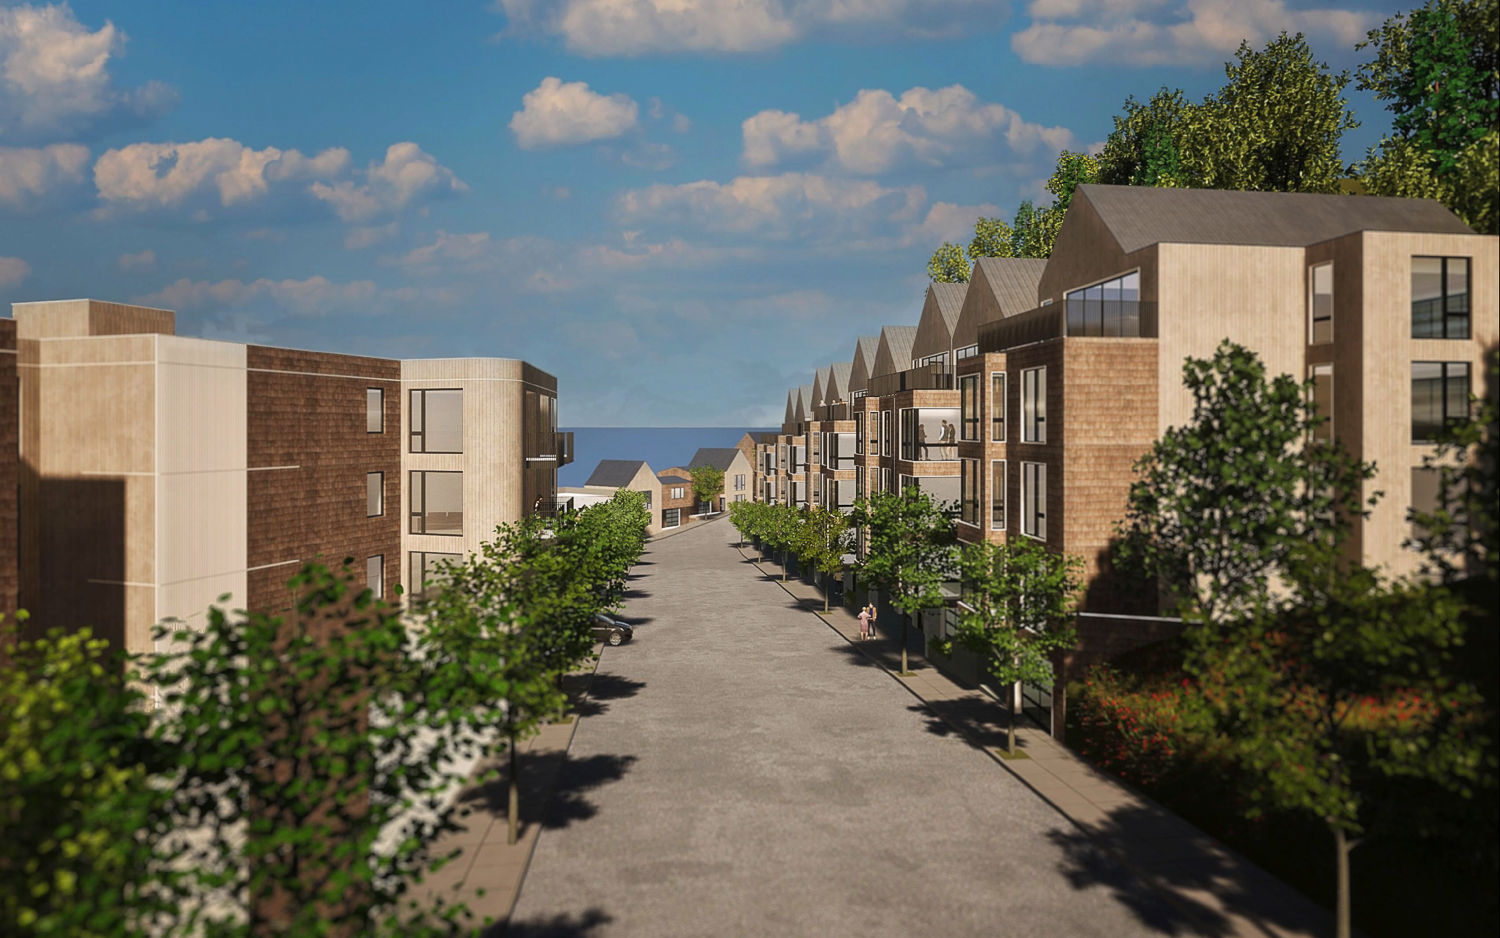 Midtown Land Homes Farview Court project, rendering by RG Architecture